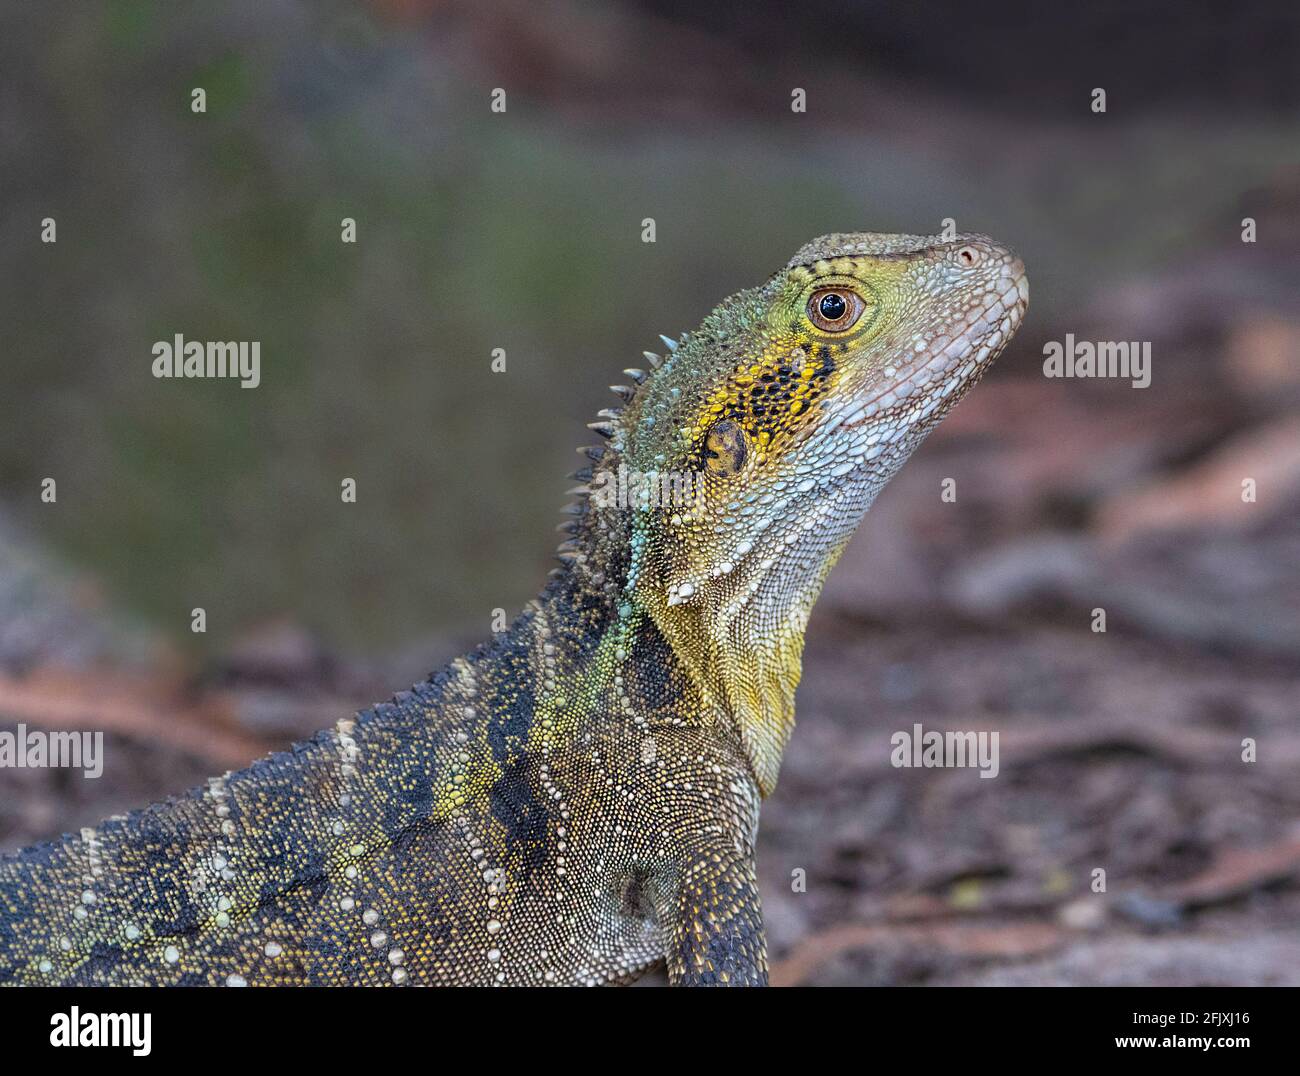 Portrait of an Eastern Water Dragon (Physignathus lesueurii or Intellagama leseuerii), an arboreal agamid species native to eastern Australia Stock Photo